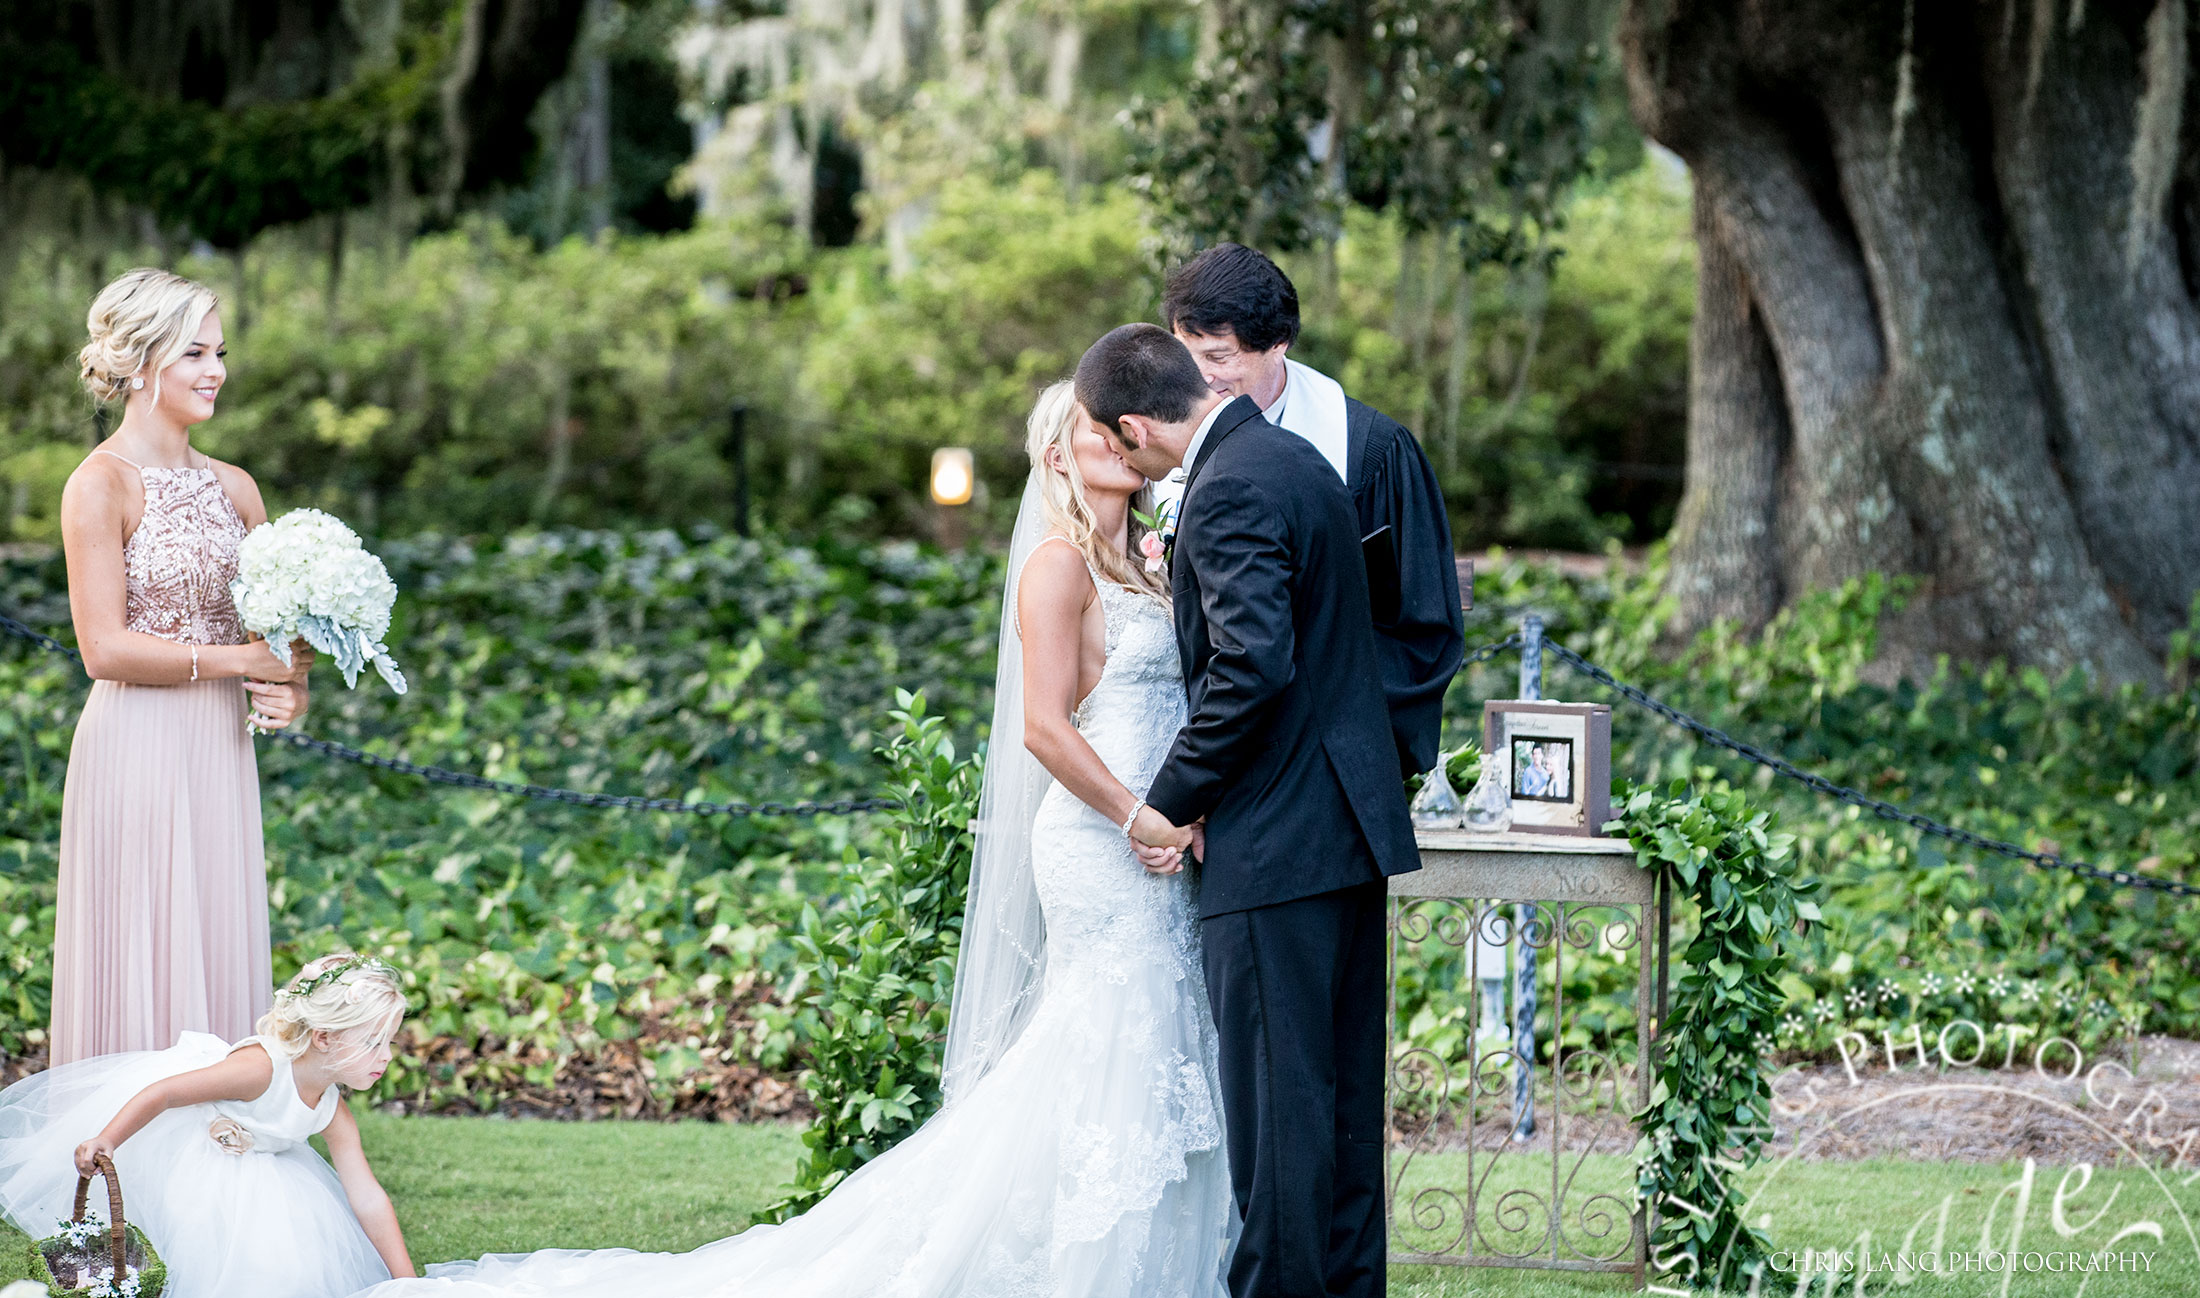 wedding ceremony at Airlie Gardens - Wilmington NC - wedding photography - the first kiss - wedding photography - lifestyle weddings